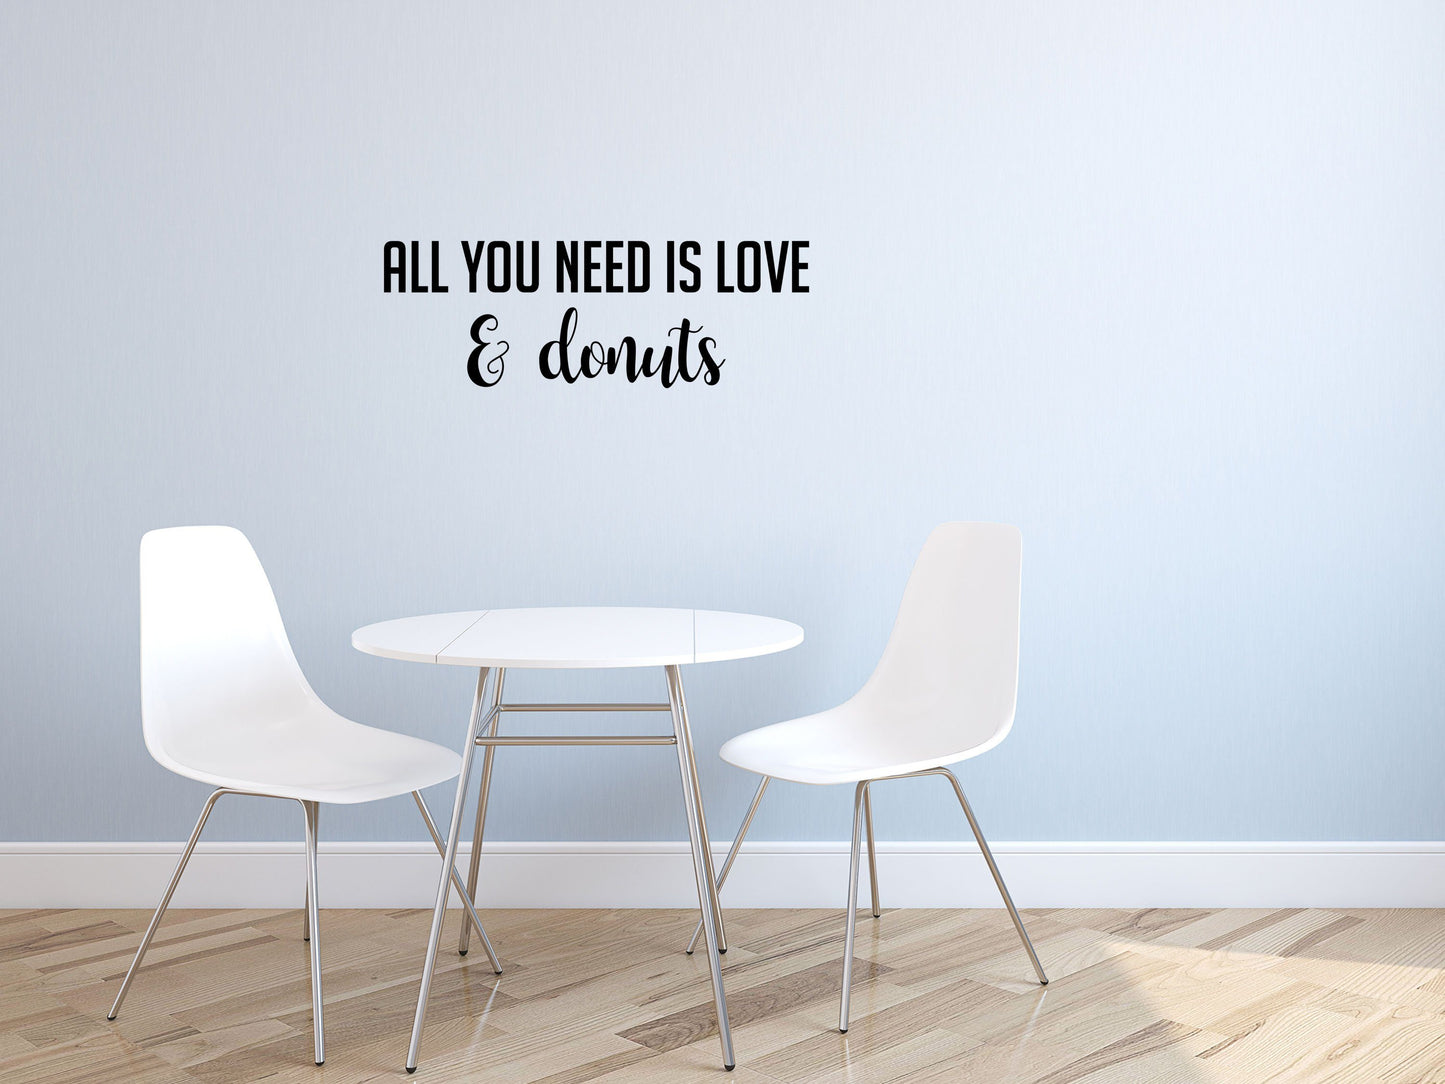 All You Need Is Love And Donuts Decal - Donuts Wall Art - Love and Donuts Wall Sign - Love Decor - Donut Wall Art Vinyl Wall Decal Done 